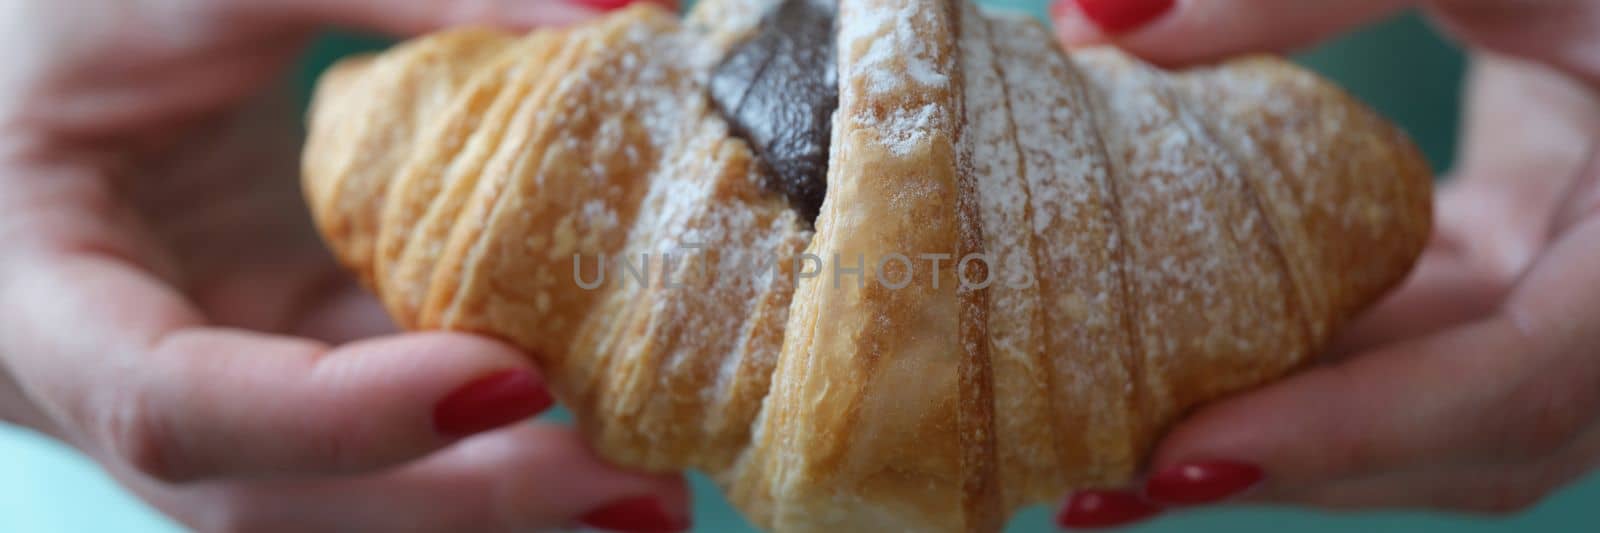 Hand shows a fresh croissant with chocolate and powdered sugar by kuprevich